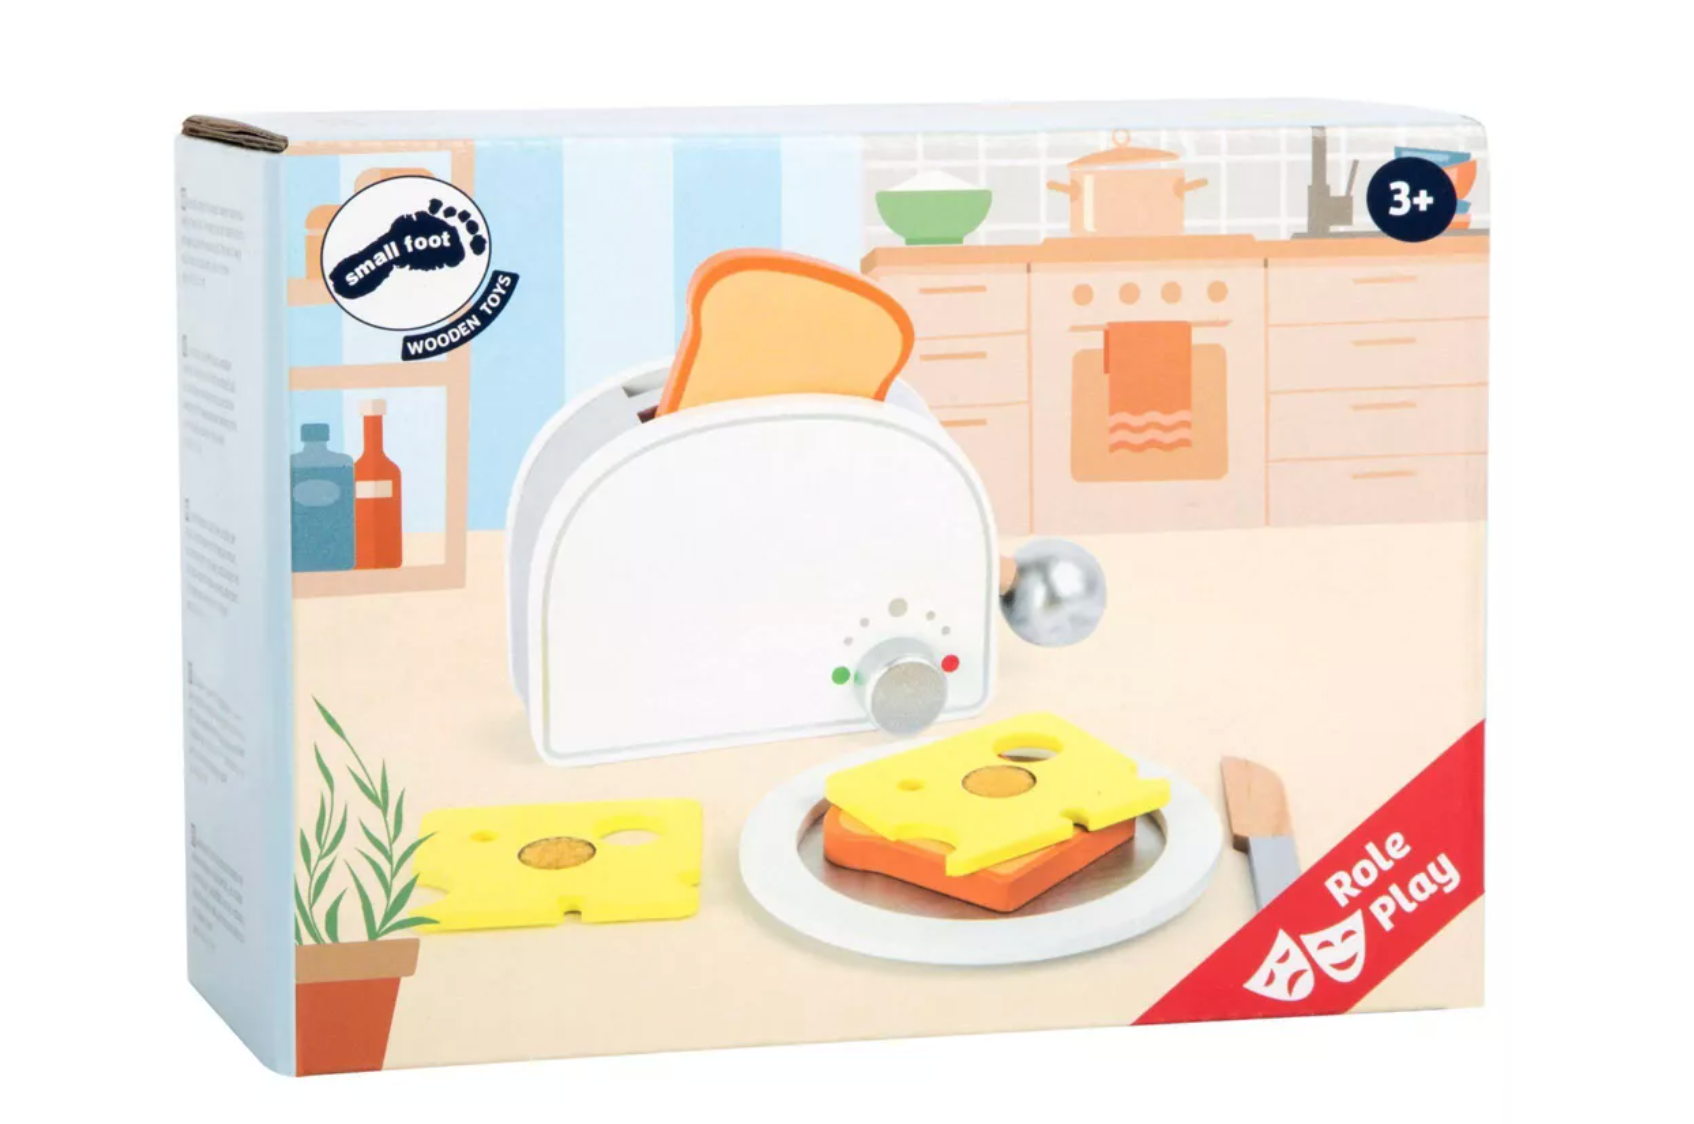 Breakfast Set Including Toaster, Toast and Much More